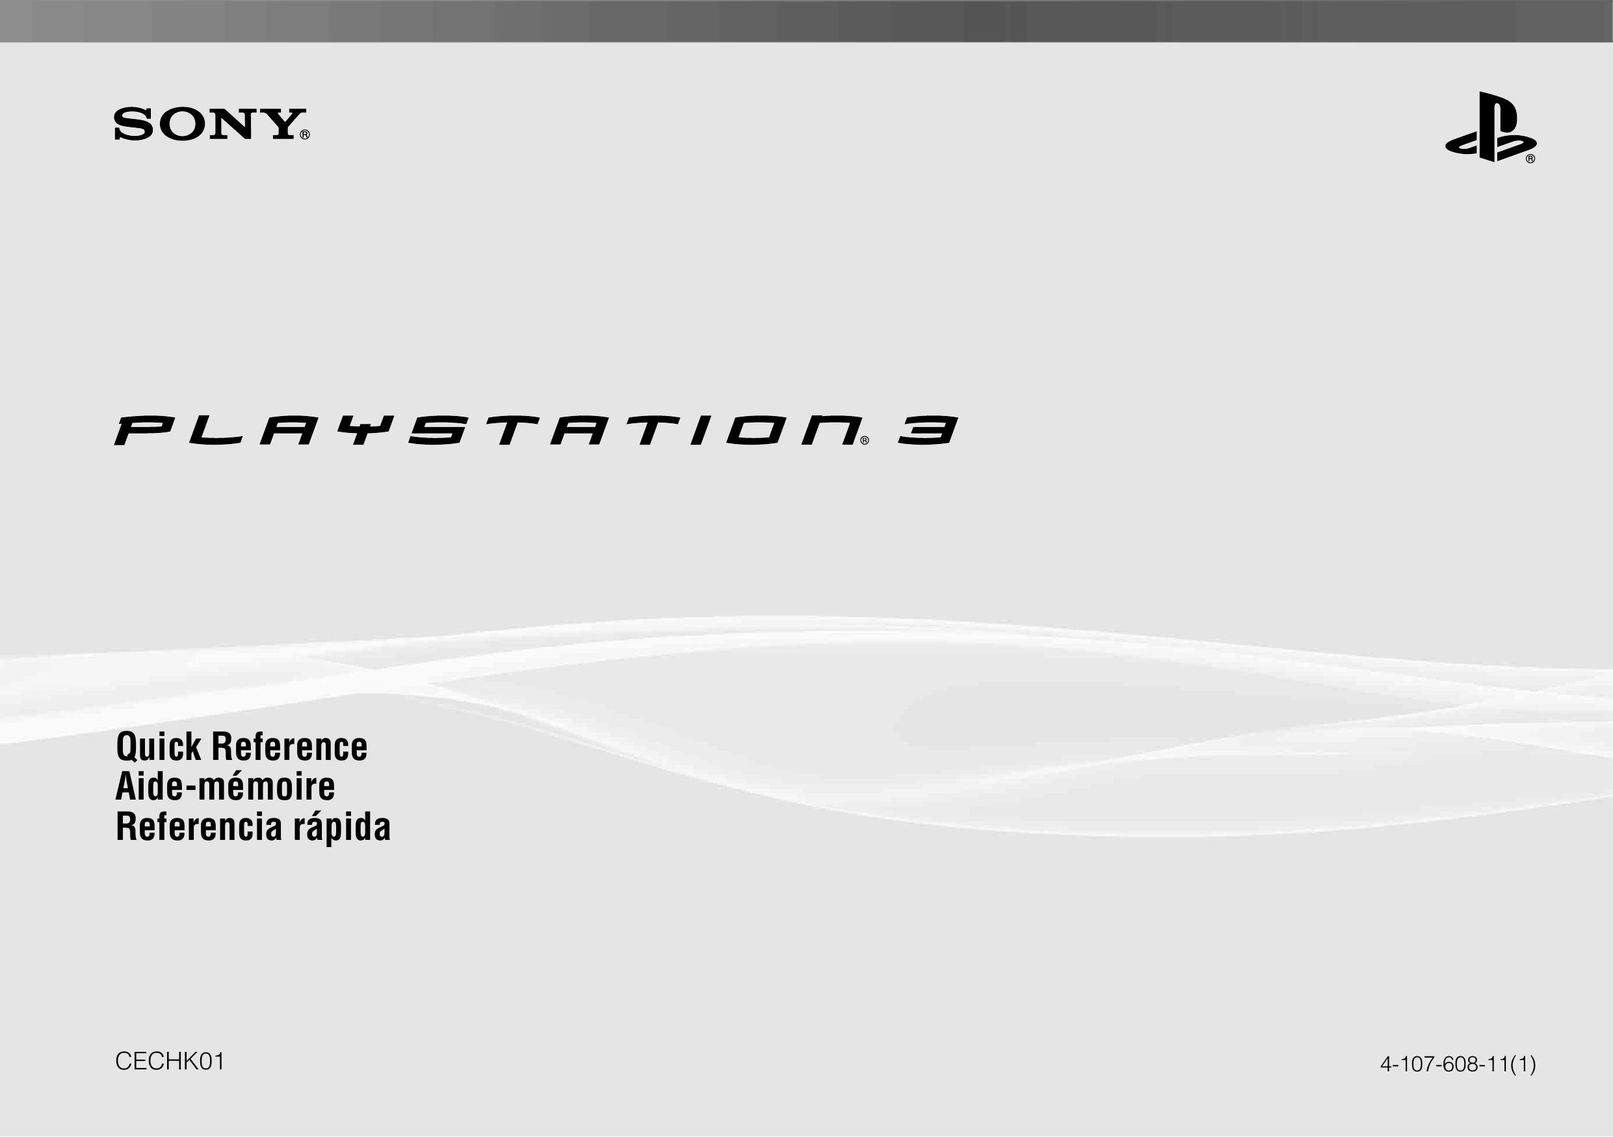 Sony 4-107-608-11 Video Game Console User Manual